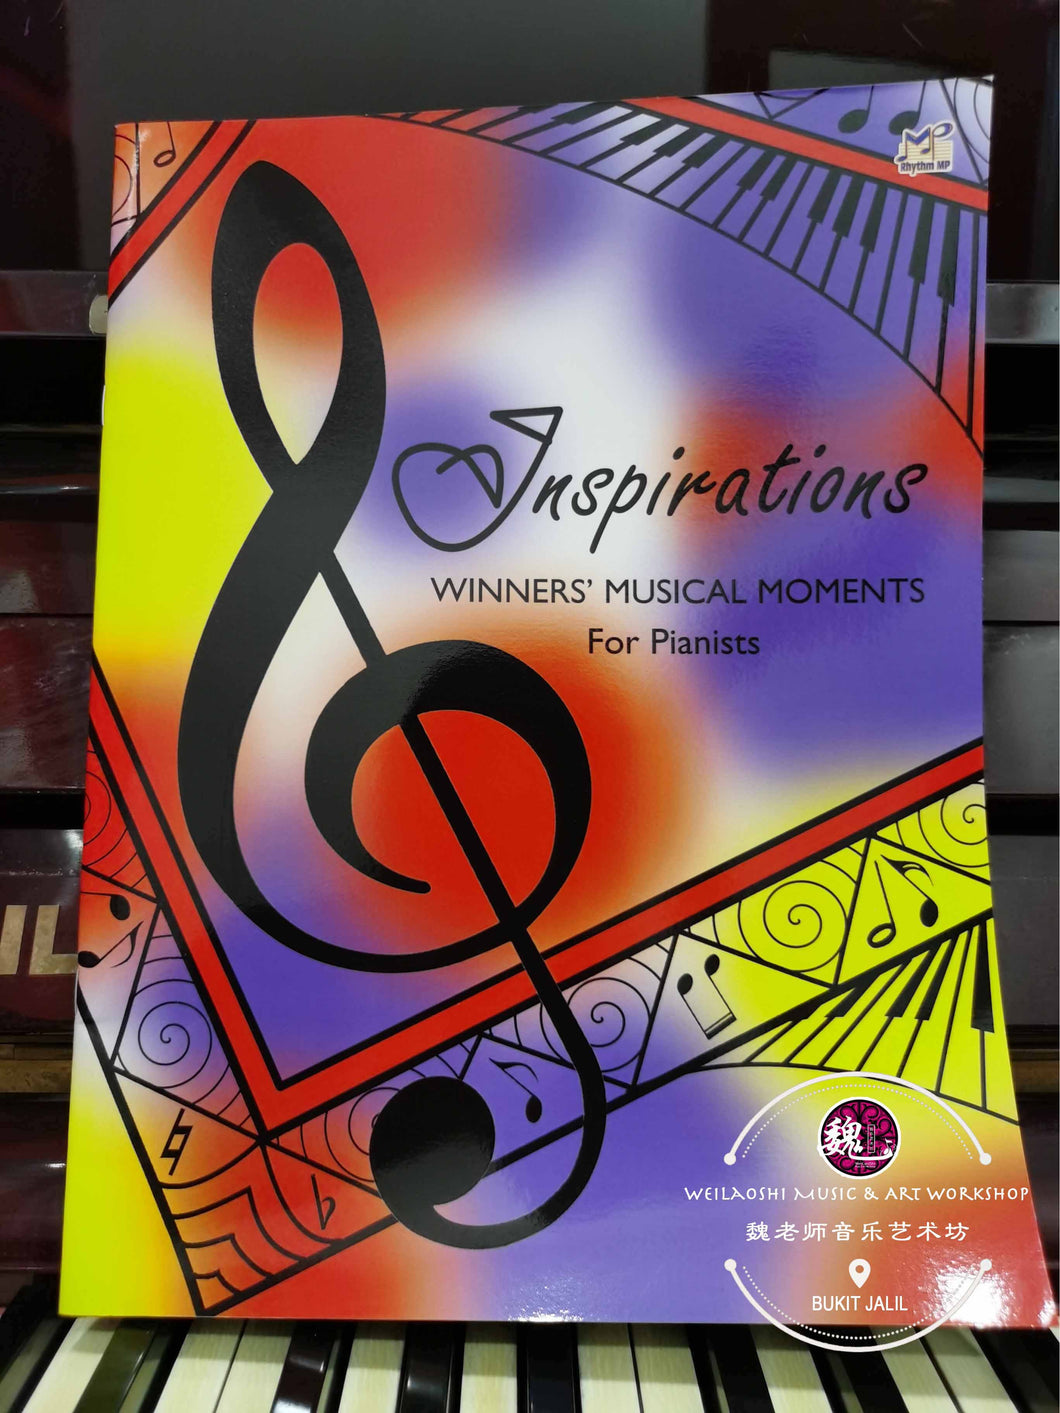 Inspirations Winners' Musical Moments For Pianists